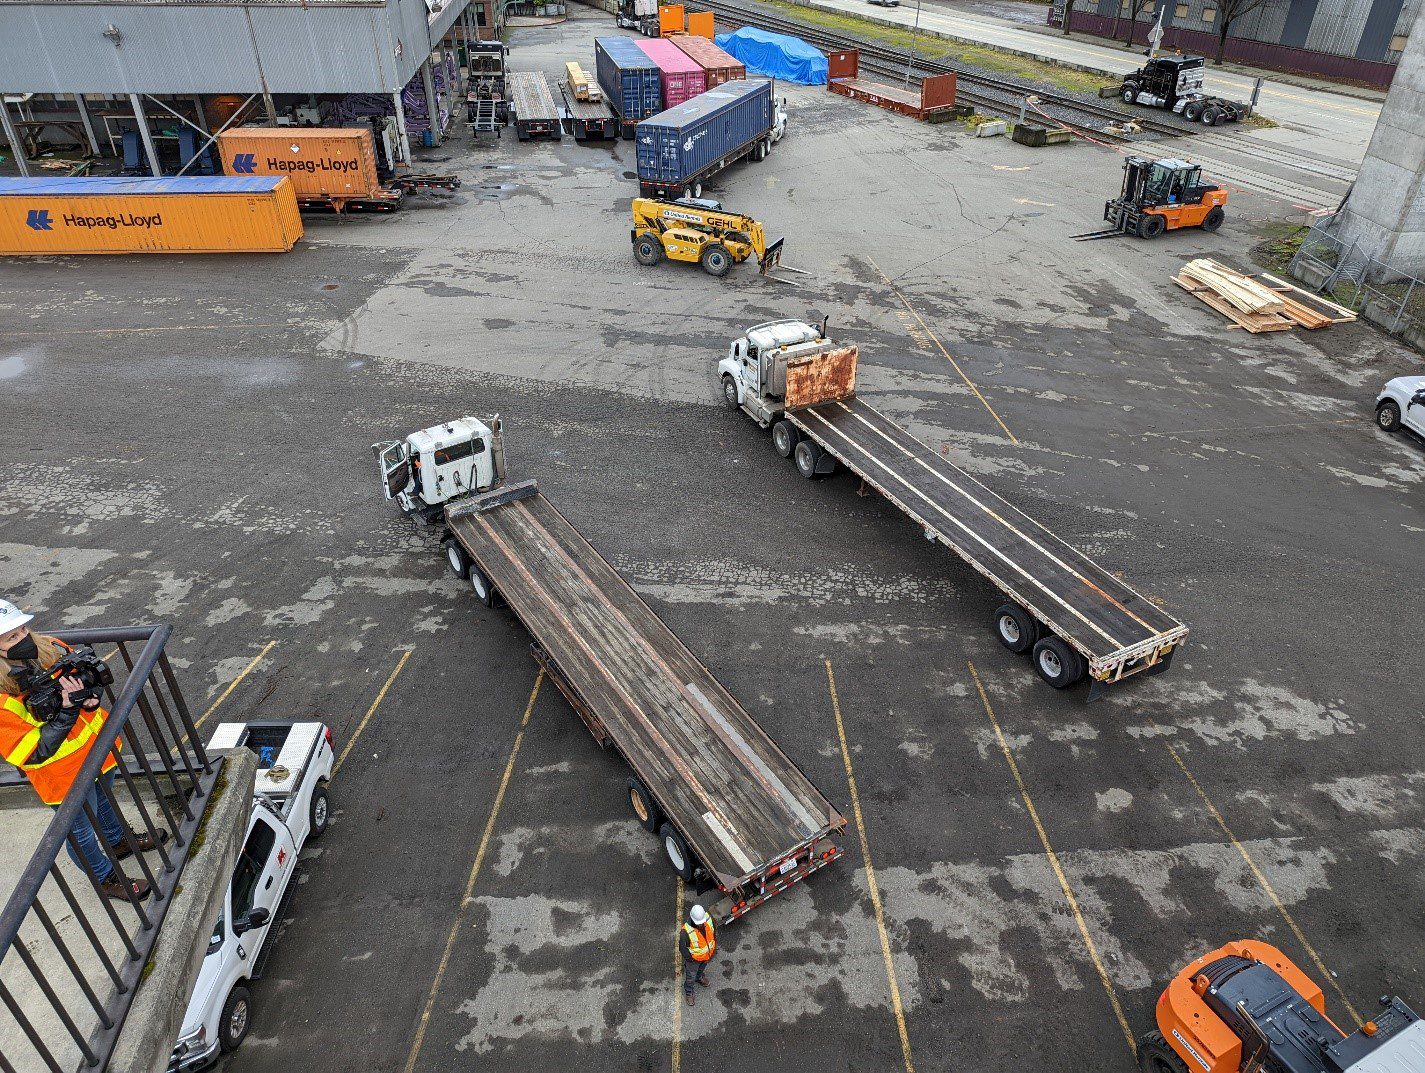 Two platform bed trucks await the first of two work platforms that were hoisted into place on Saturday, January 8. The platforms were lifted by cranes and forklifts onto the truck beds, then driven into position underneath the bridge in the hoisting area.